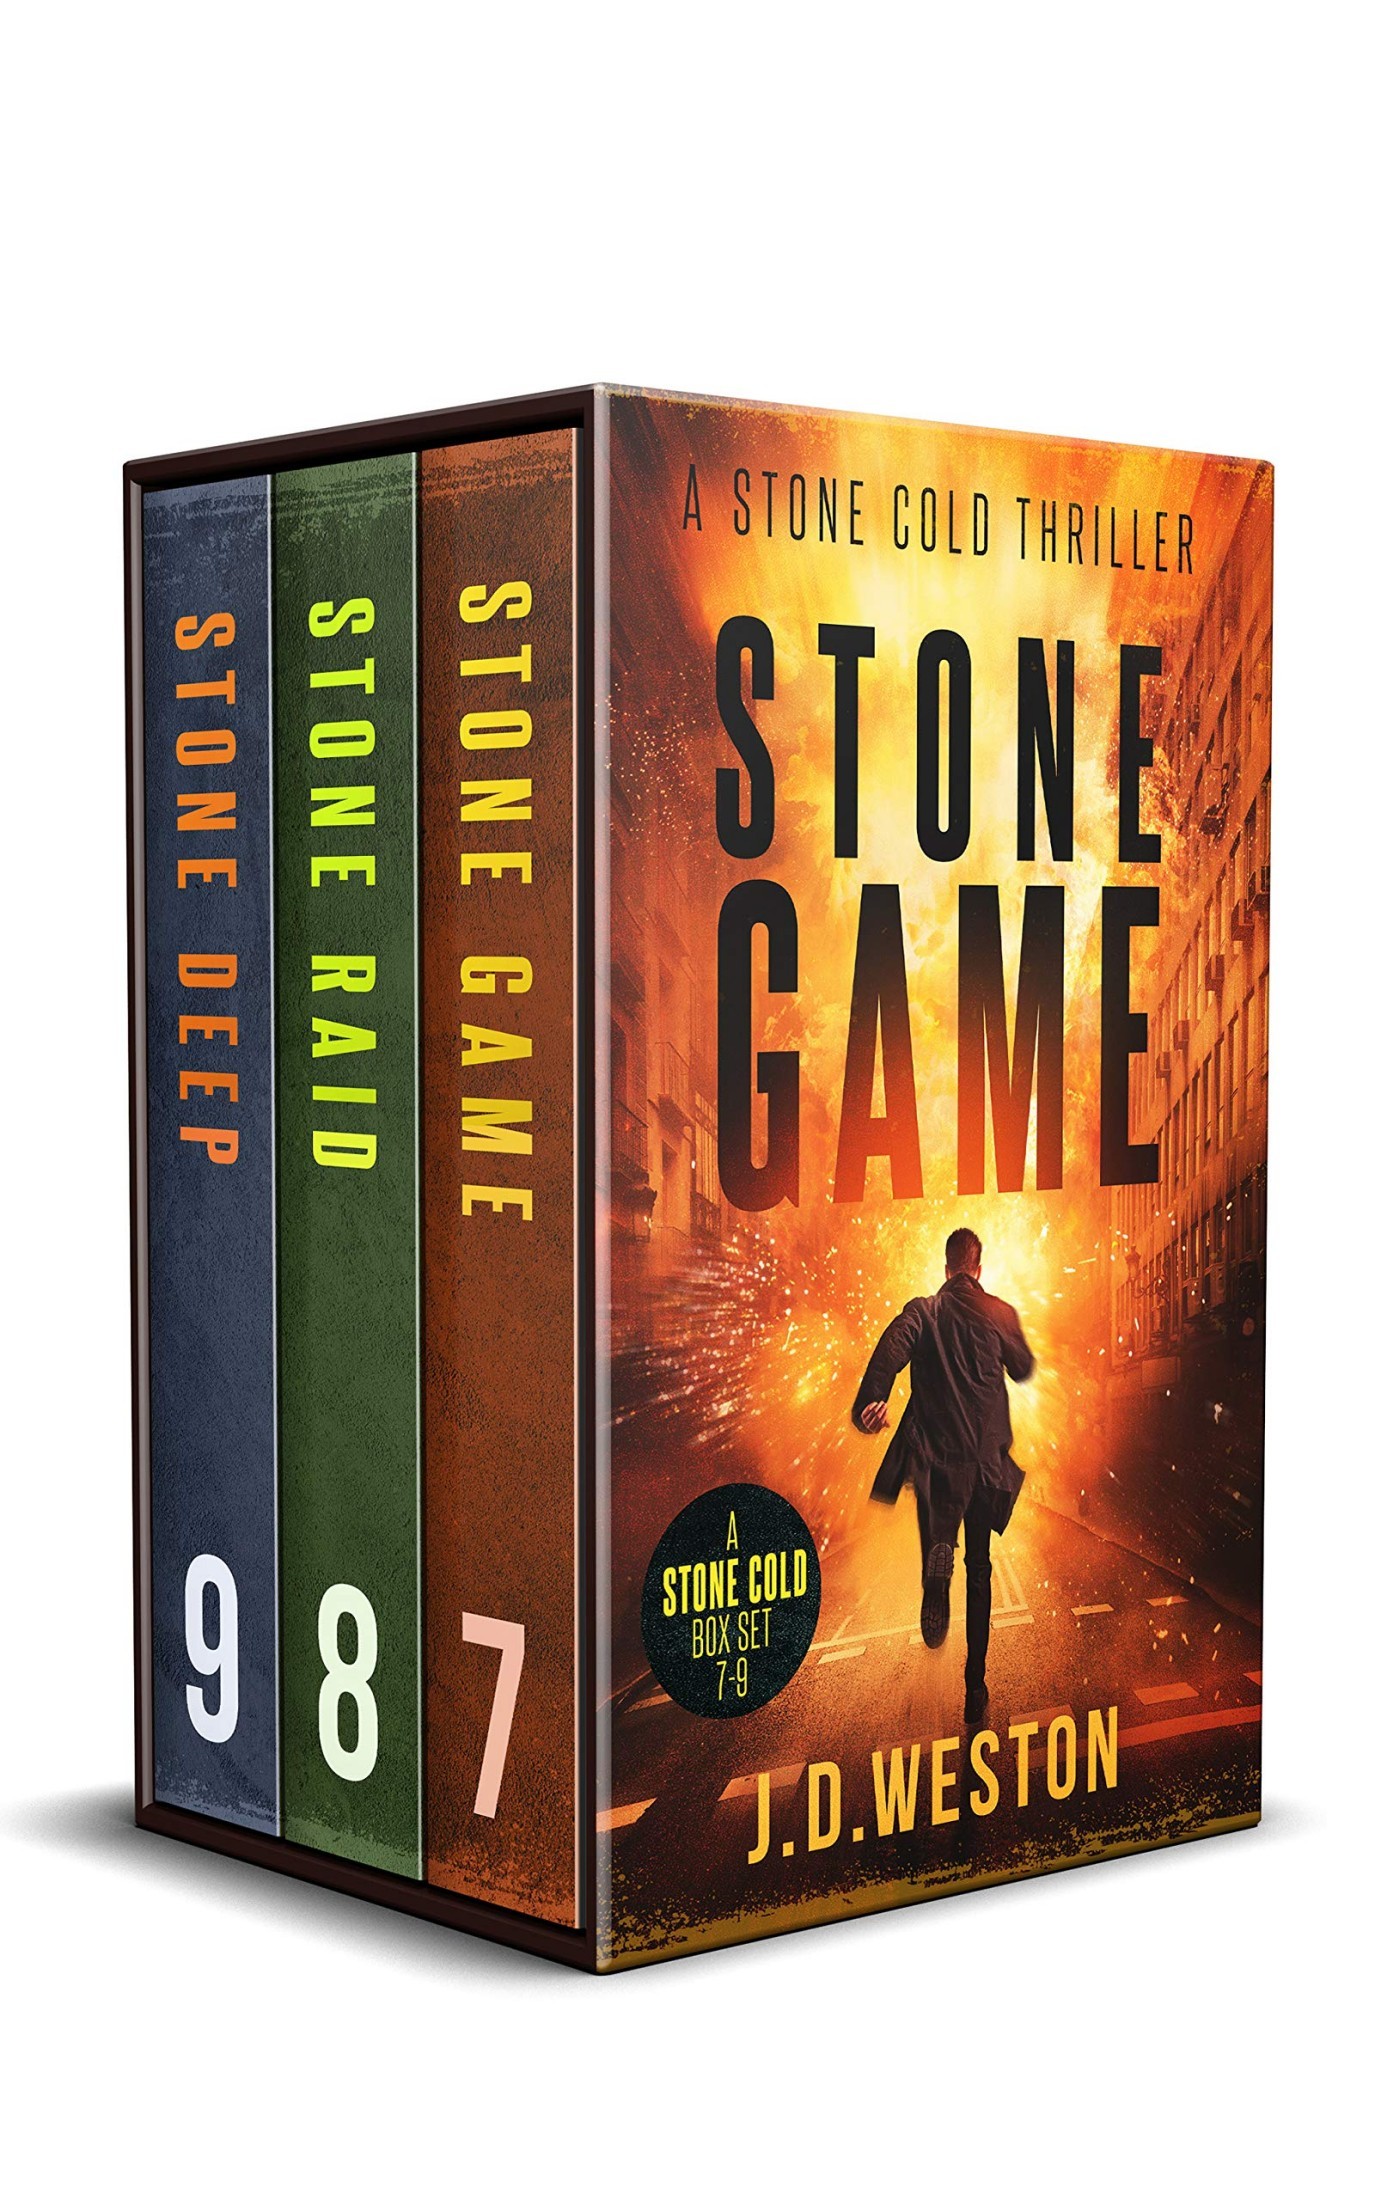 The Stone Cold Thriller Series Books 7 - 9